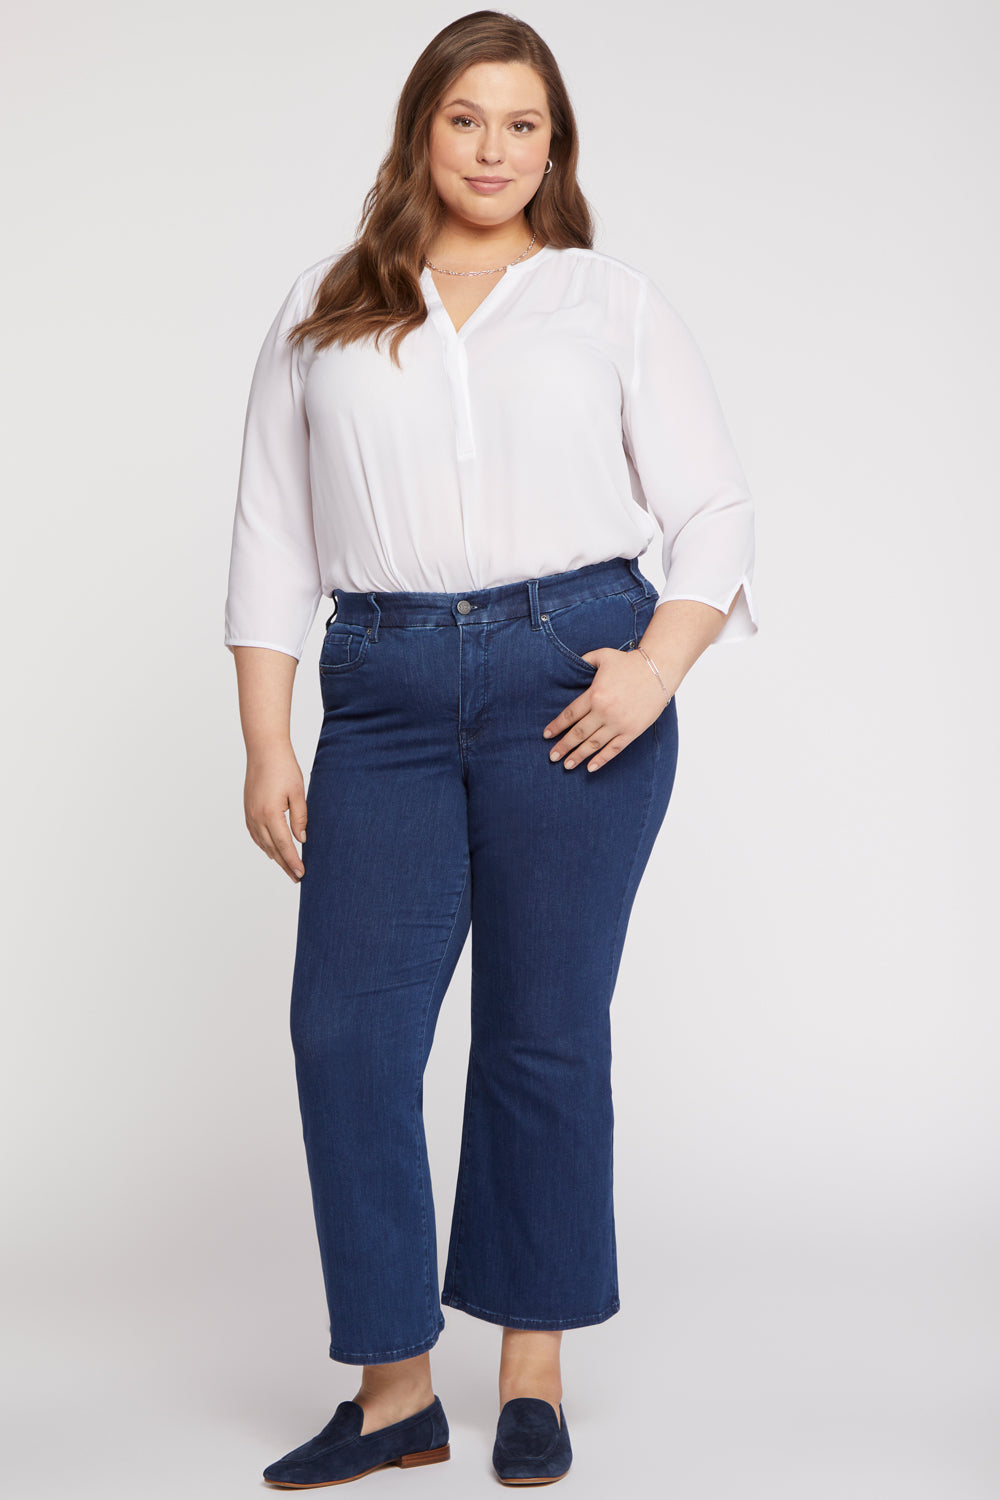 Women's Plus Size Relaxed Jeans - Straight & More Fits